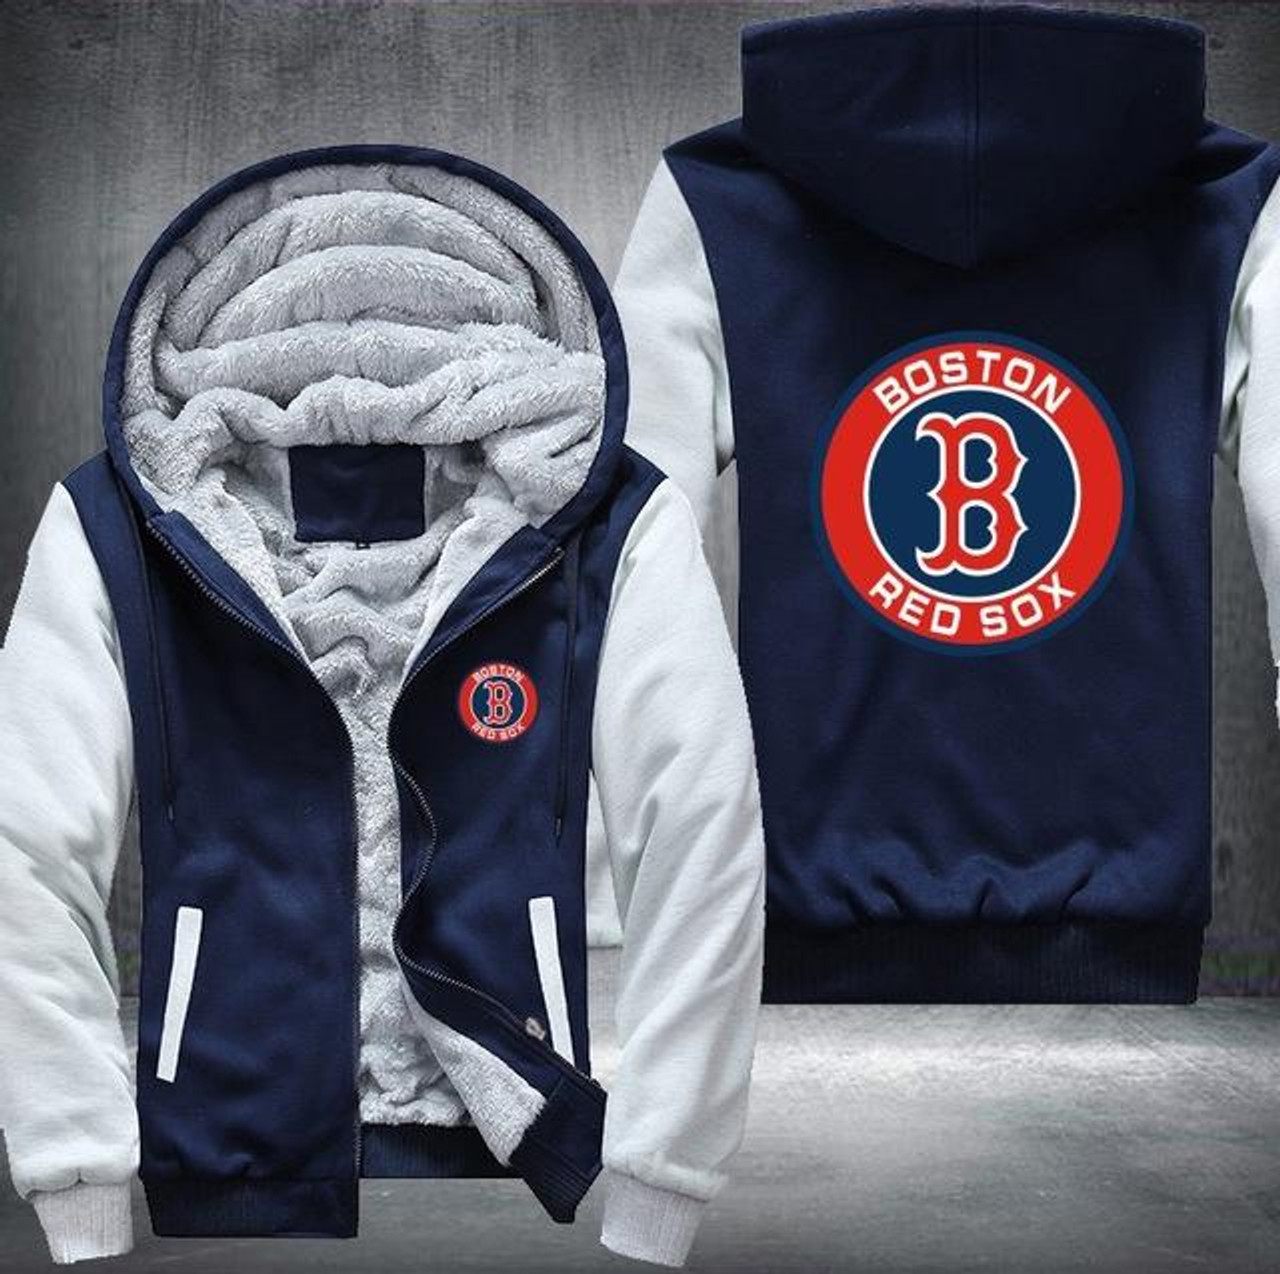 **(OFFICIAL-BOSTON-RED-SOXS,PREMIUM-ZIP-UP-FRONT-HOODIES/THICK-FLEECE-INNER-LINED & IN-MIDNIGHT-BLACK & LITE-GREY-TWO-TONE-COLOR/3D-GRAPHIC-DOUBLE-SIDED-PRINTING,WITH-OFFICIAL-CLASSIC-RED-SOXS-LOGO-ON-BOTH-SIDES)**